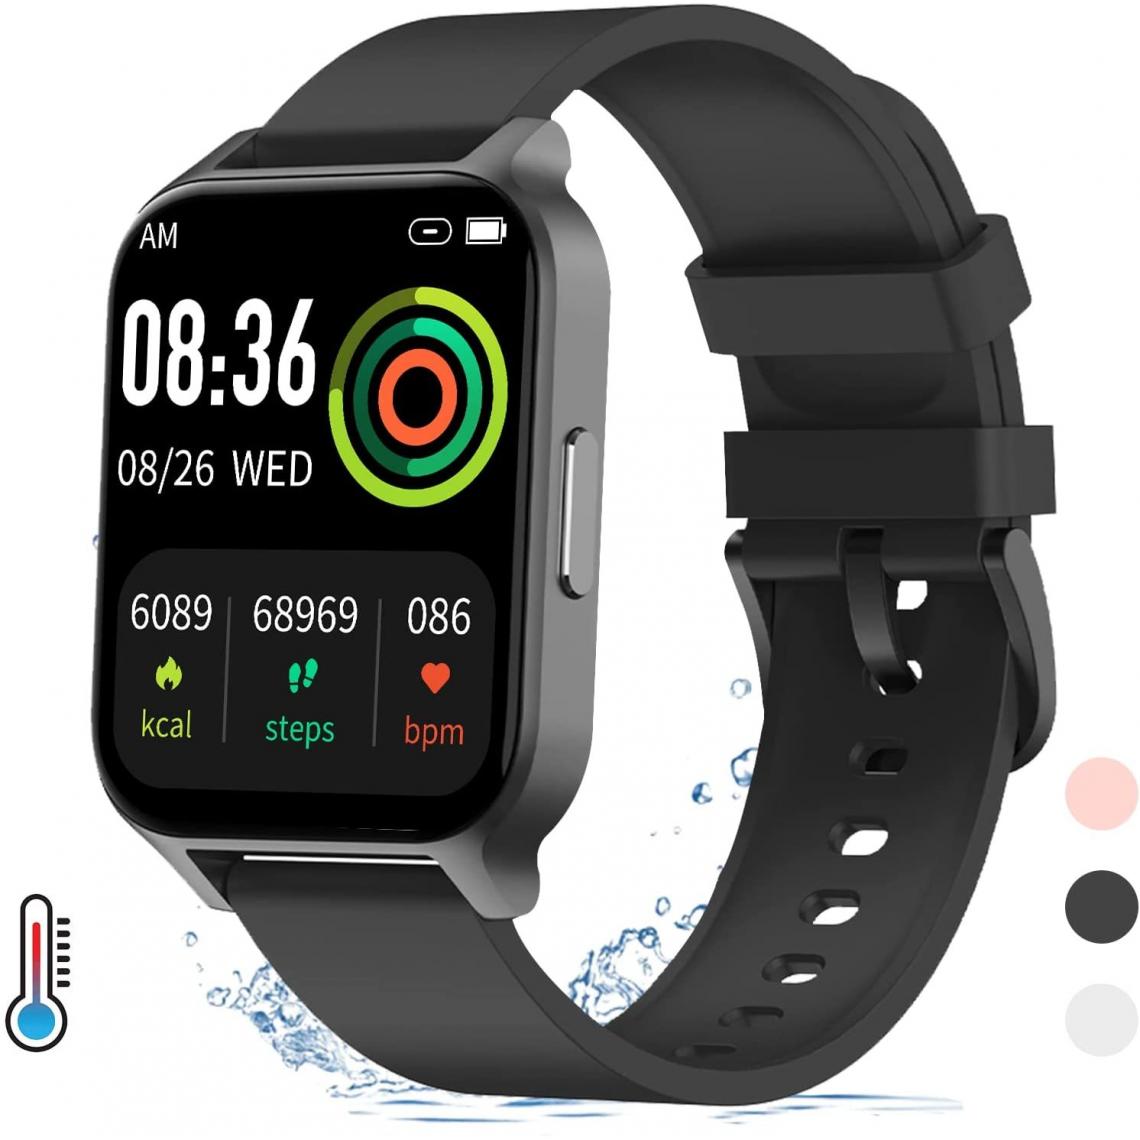 Chronotech Montres - Smart Watch, 1.69 inch Fitness Smartwatch Body Temperature with Heart Rate Sleep Monitor, Pedometer Smart Watch for Women Men IP68 Waterproof Smartwatch 24 Mode Sports for iOS Android (black) - Montre connectée